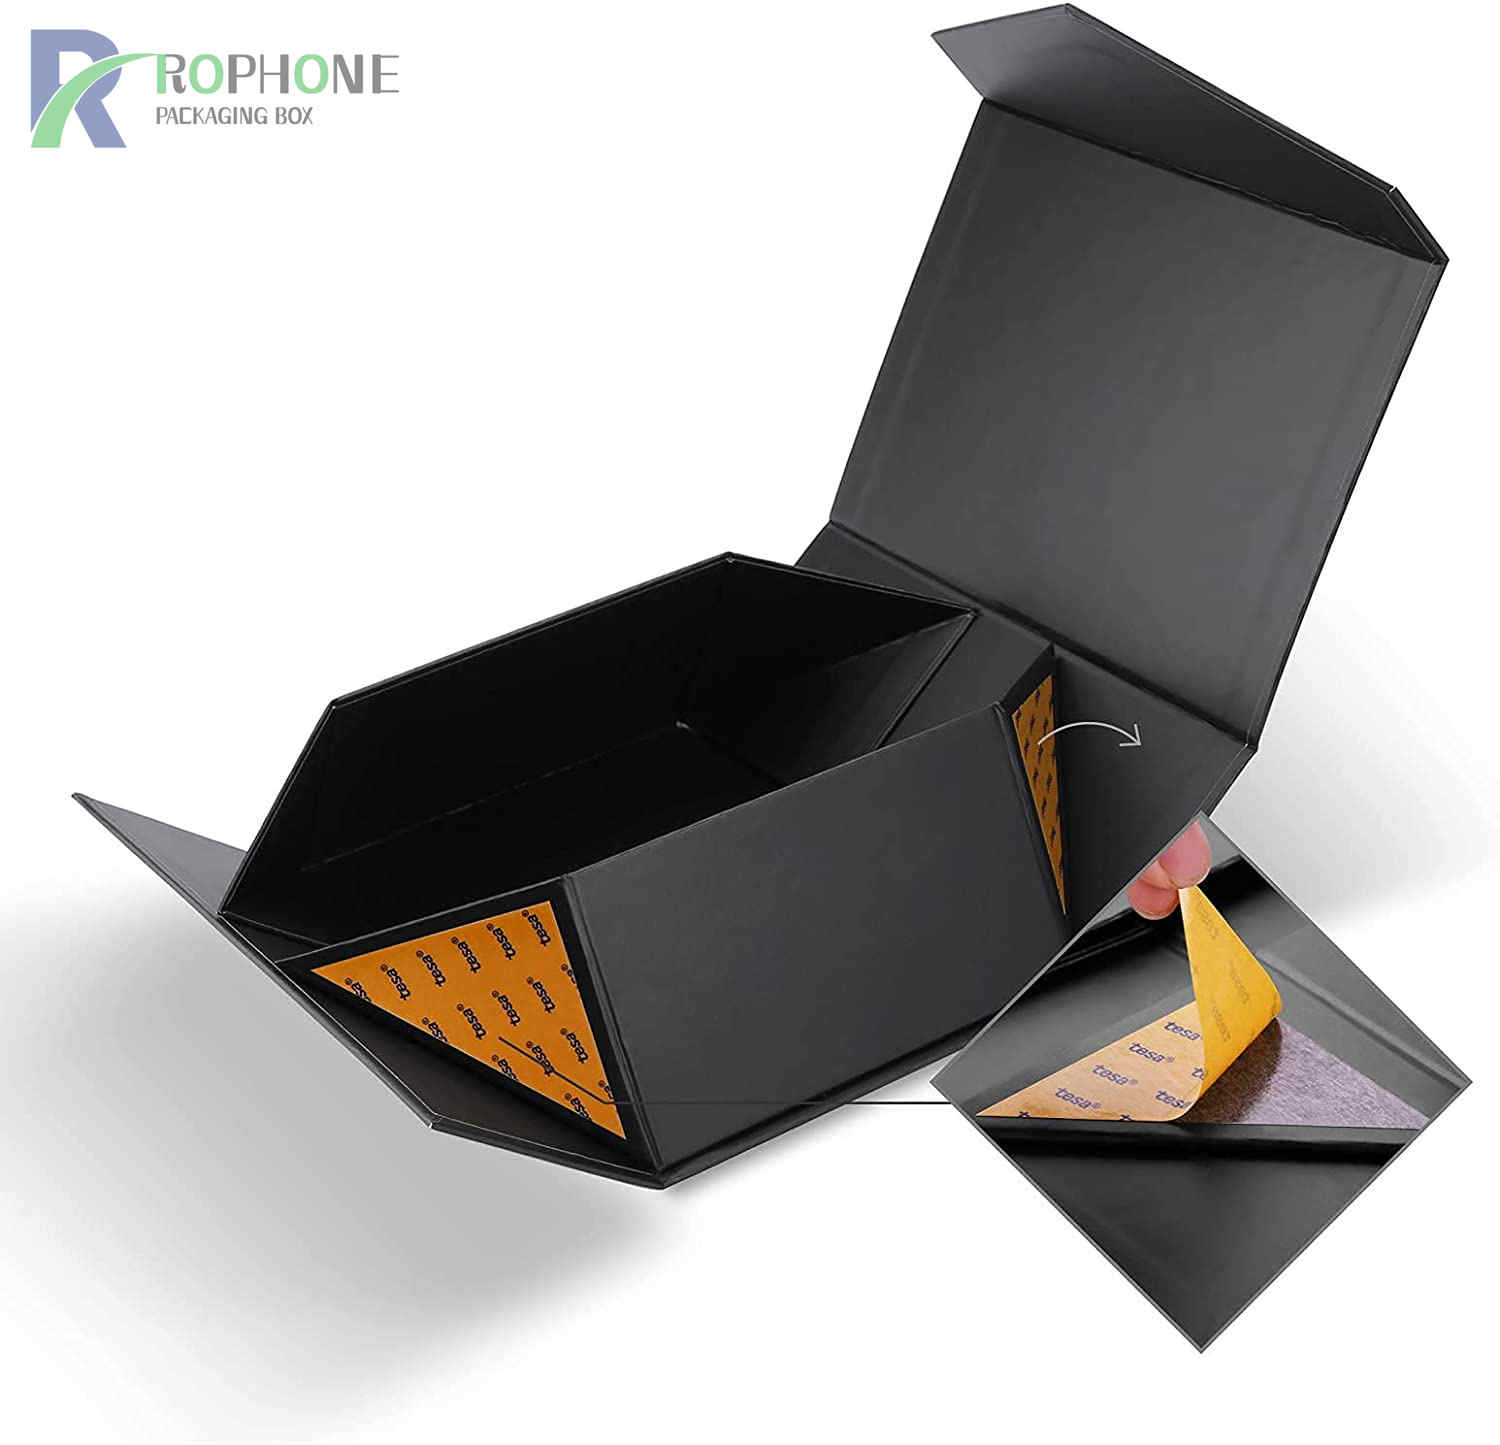 Affordable Foldable packaging box